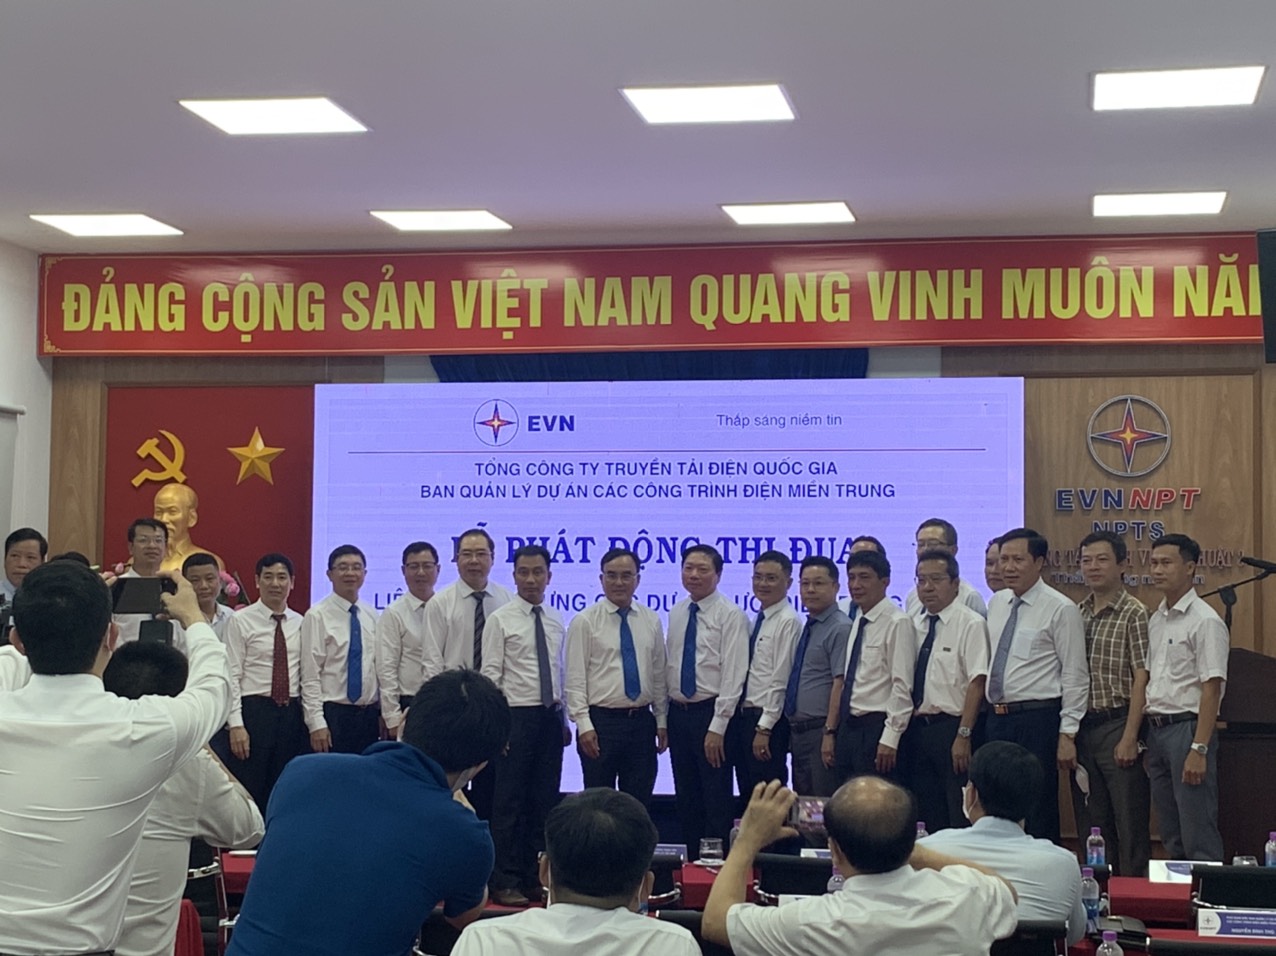 Launching ceremony of emulation and construction cooperation Van Phong 1 BOT BOT thermal power plant synchronous grid projects